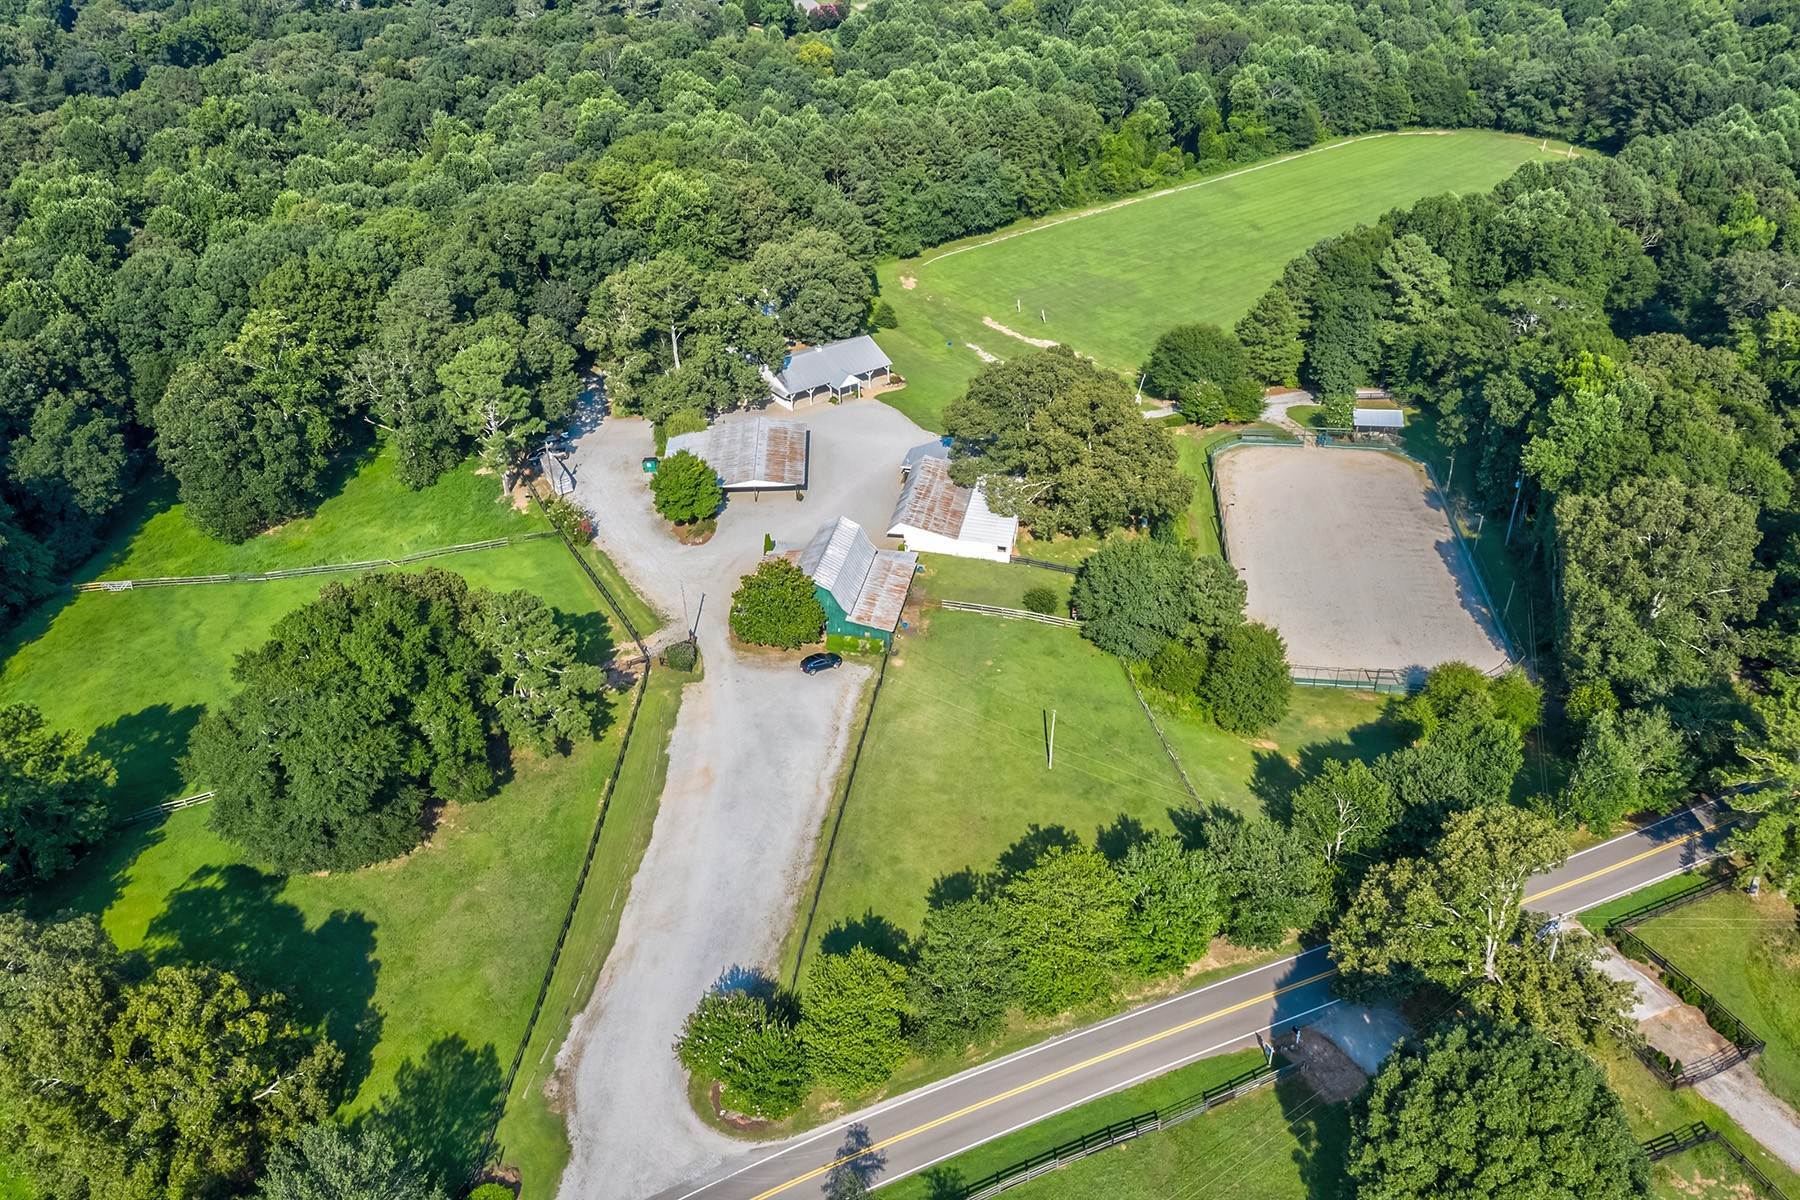 Land for Sale at First Time for Sale in 40 Years Chukkar Farm 1375 Liberty Grove Road Alpharetta, Georgia 30004 United States